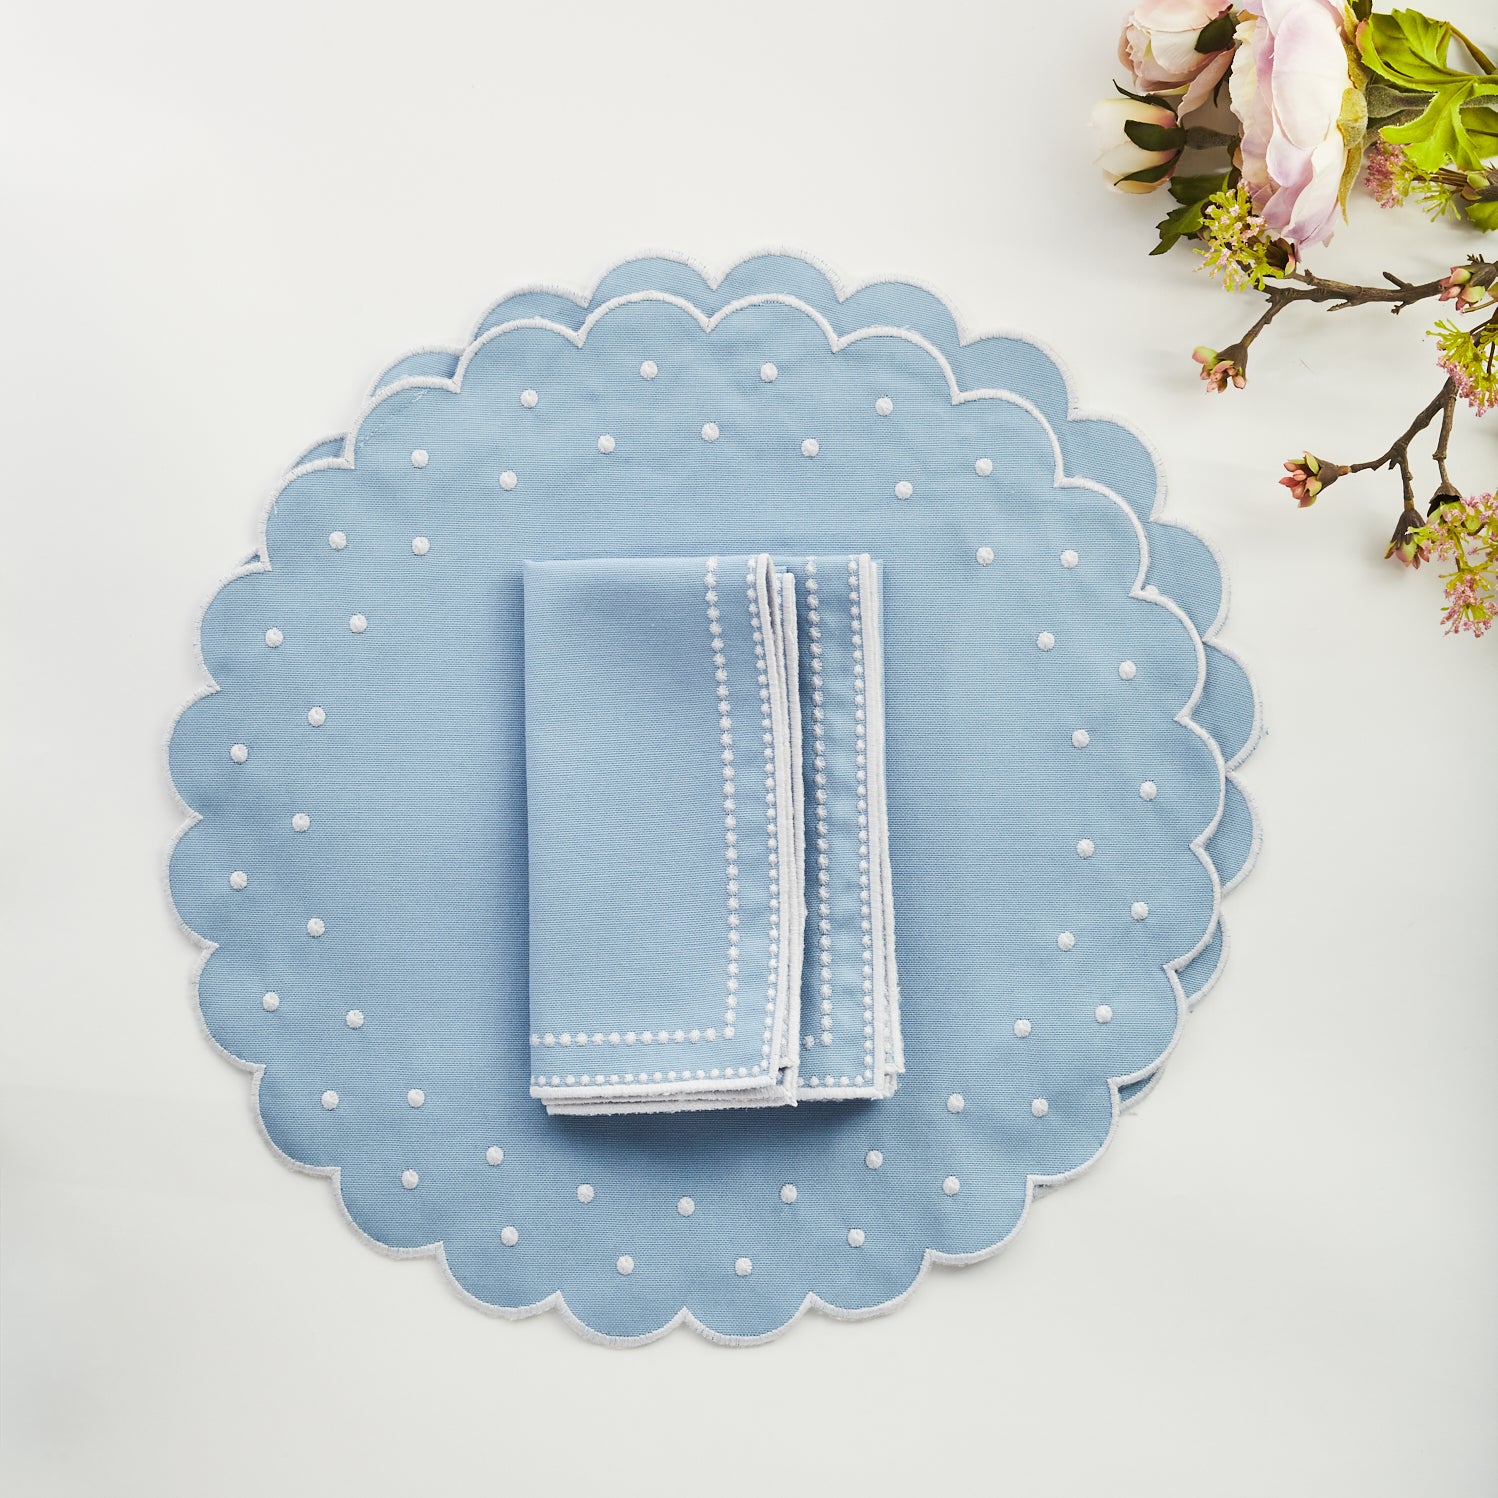 Daisy Blue Placemat & Napkin (set of 2)